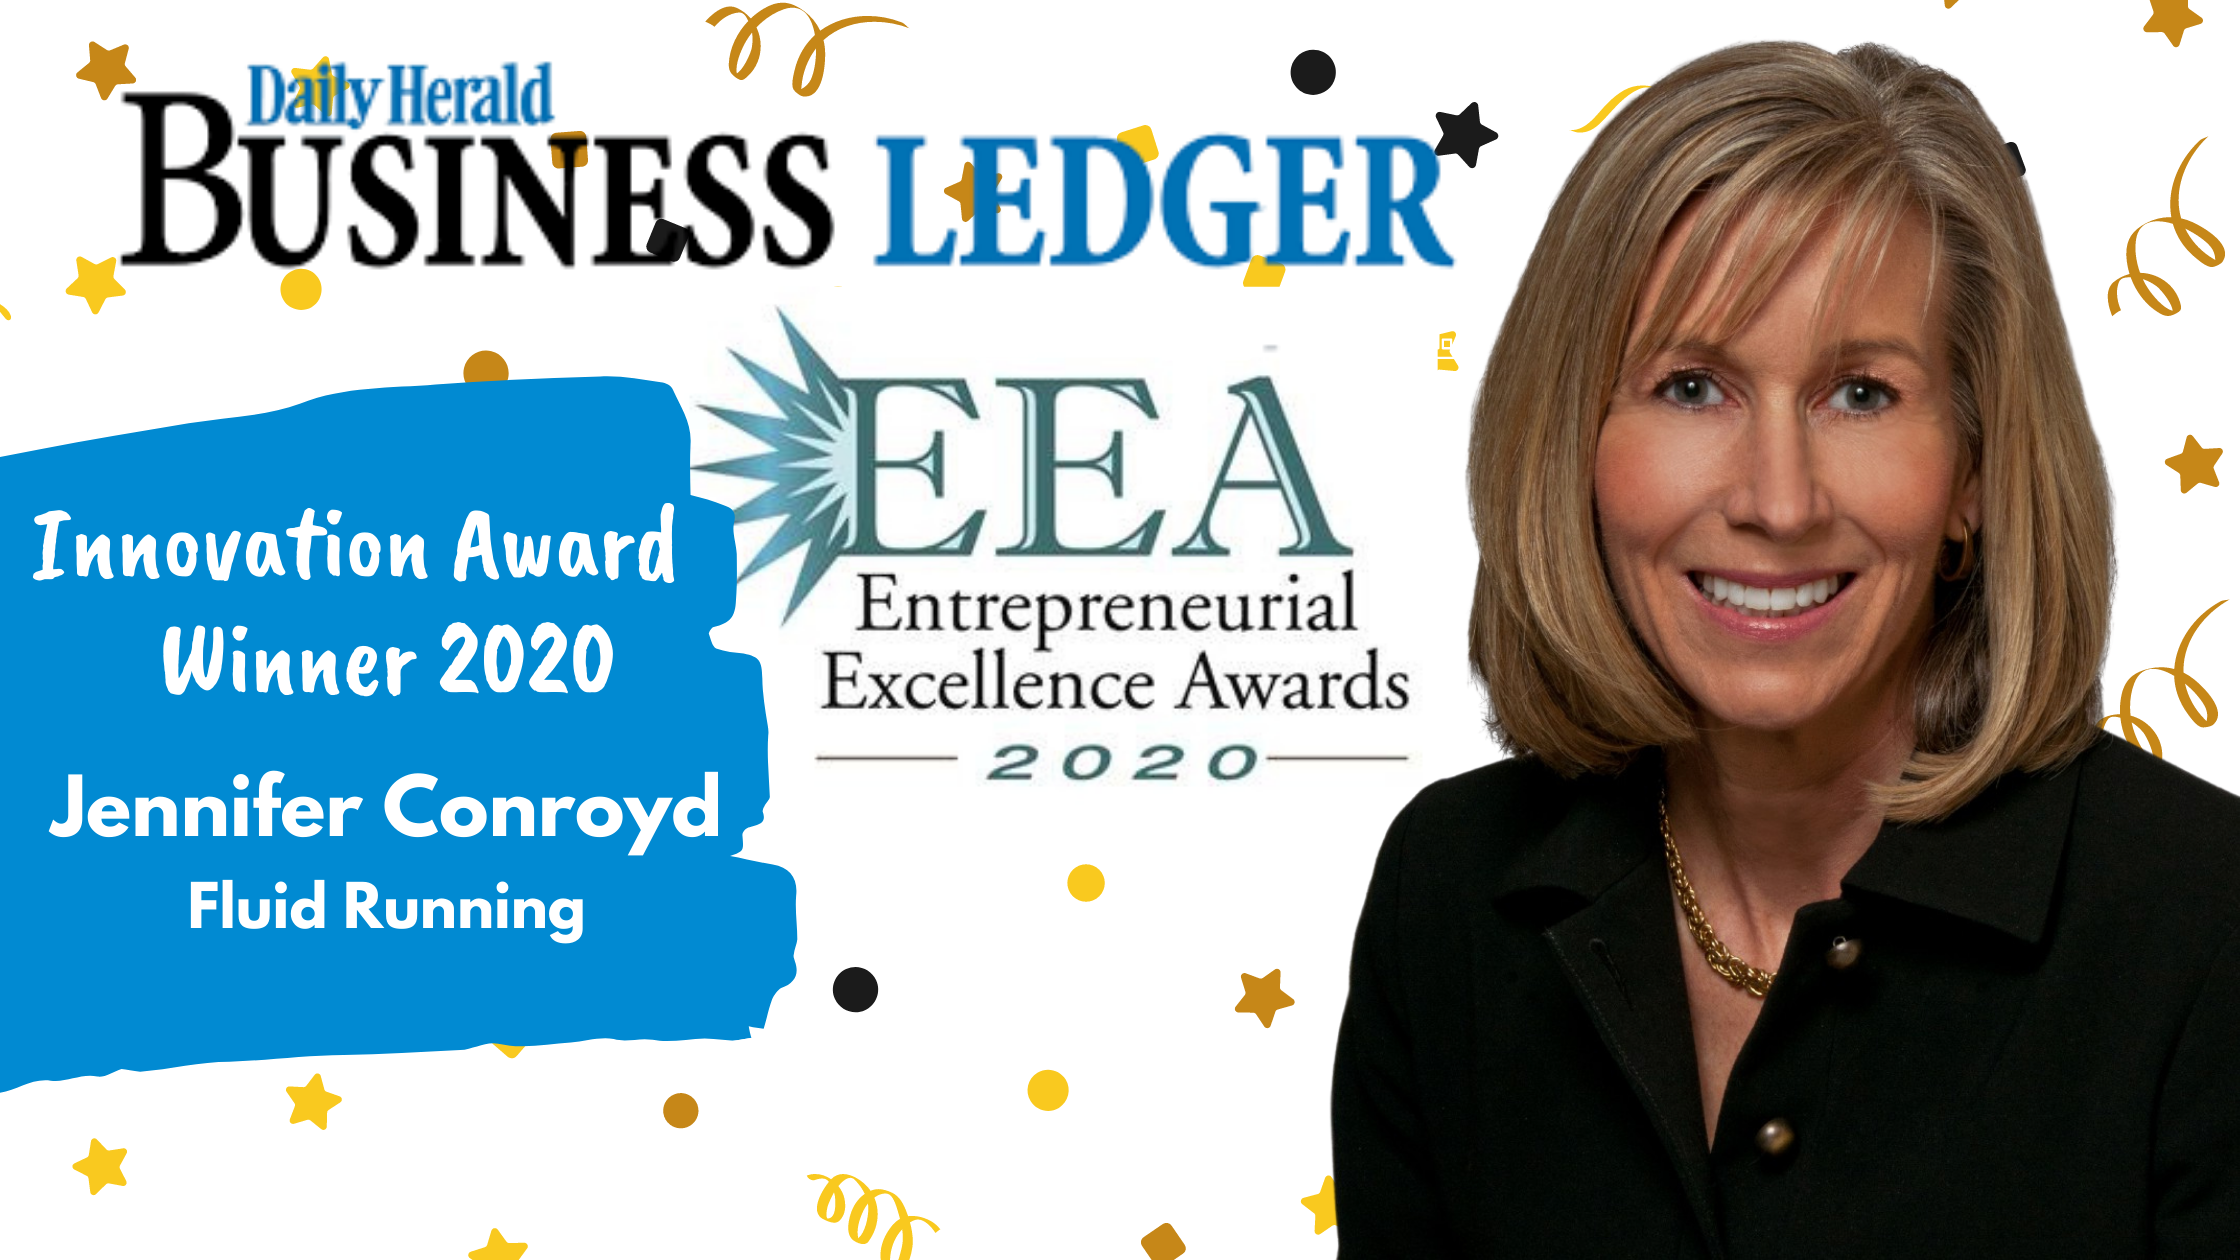 Daily Herald Business Ledger’s Entrepreneurial Excellence in Innovation Award